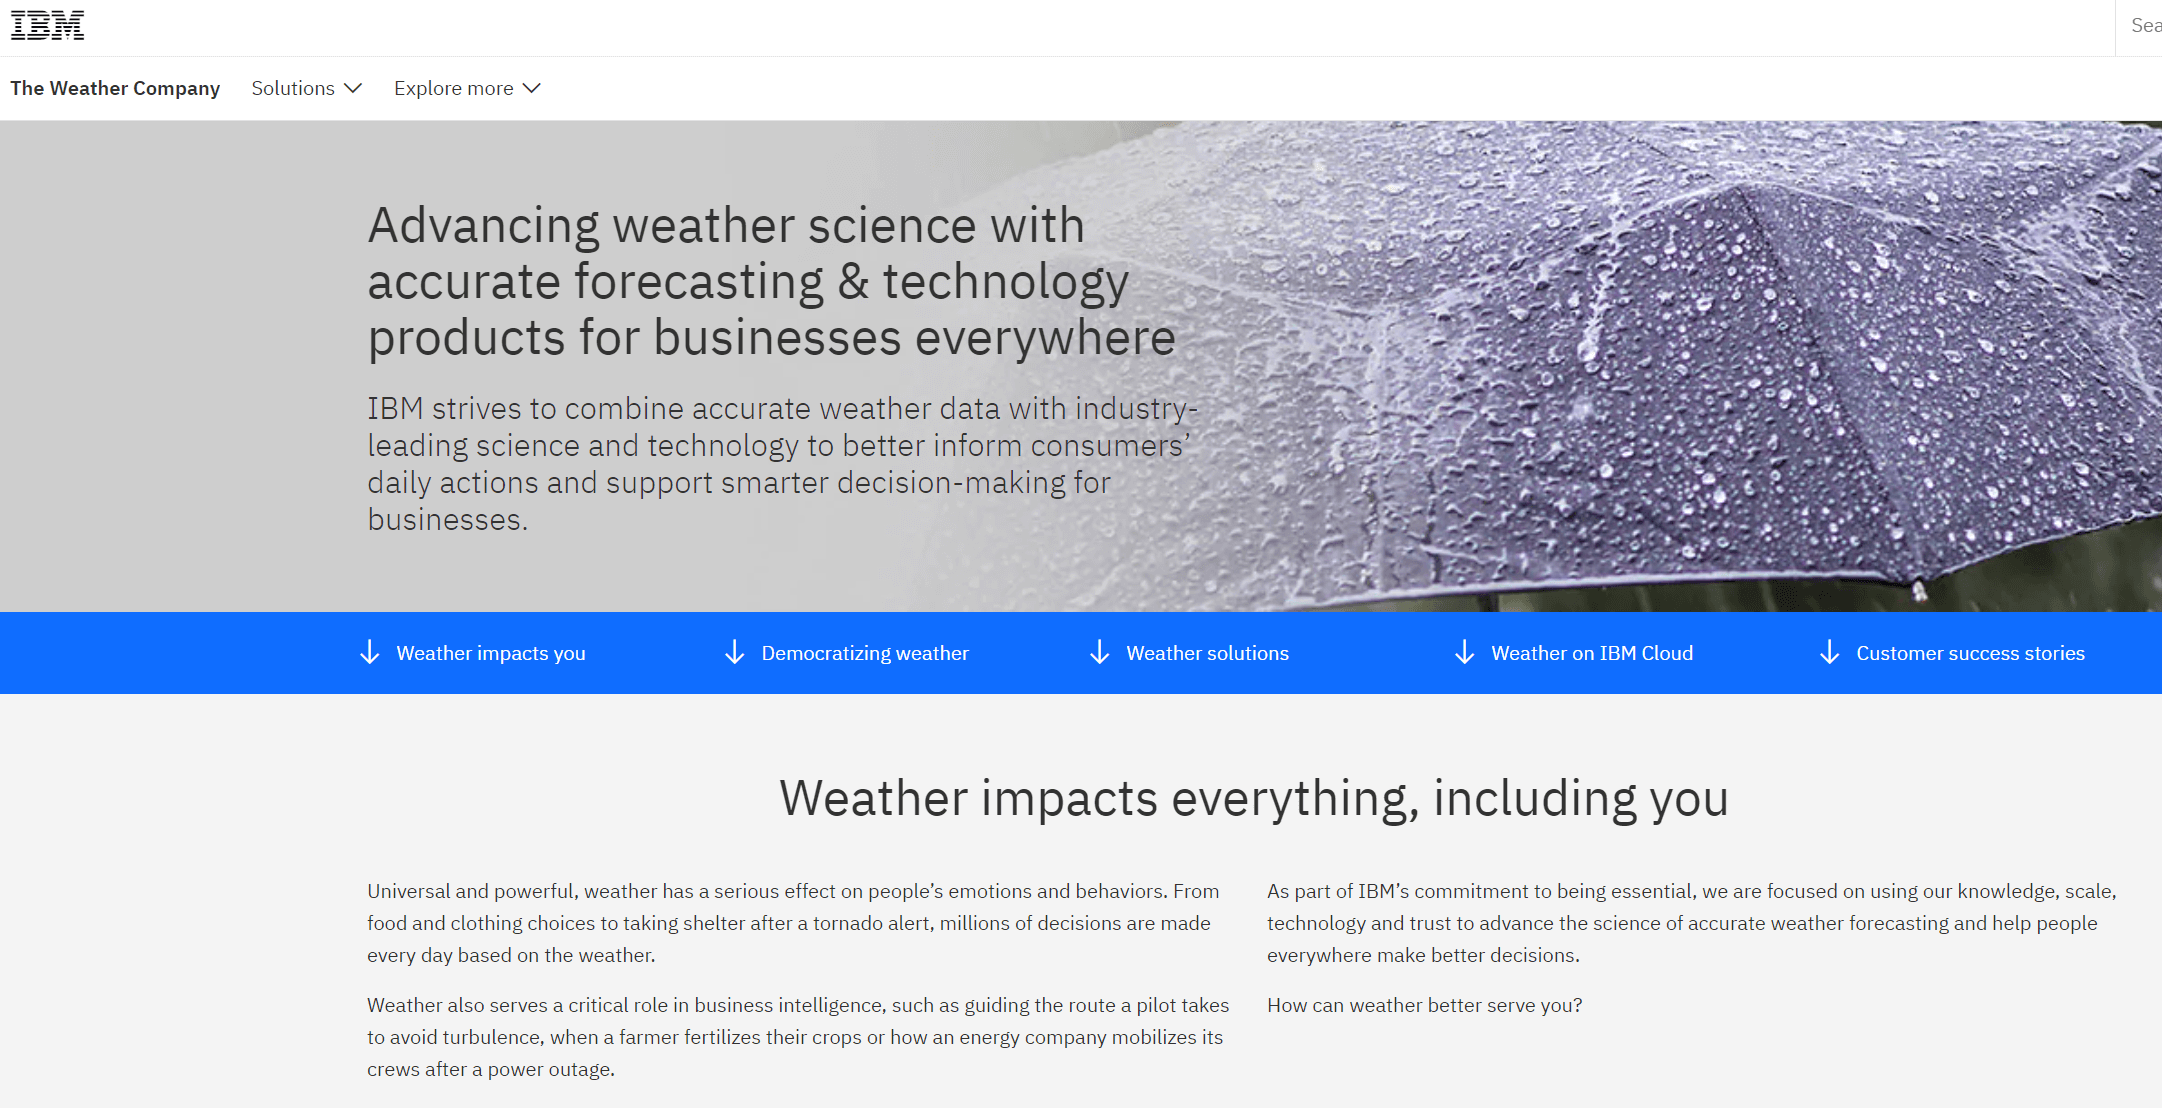 Advanicing weather science with accurate forecasting on IBM